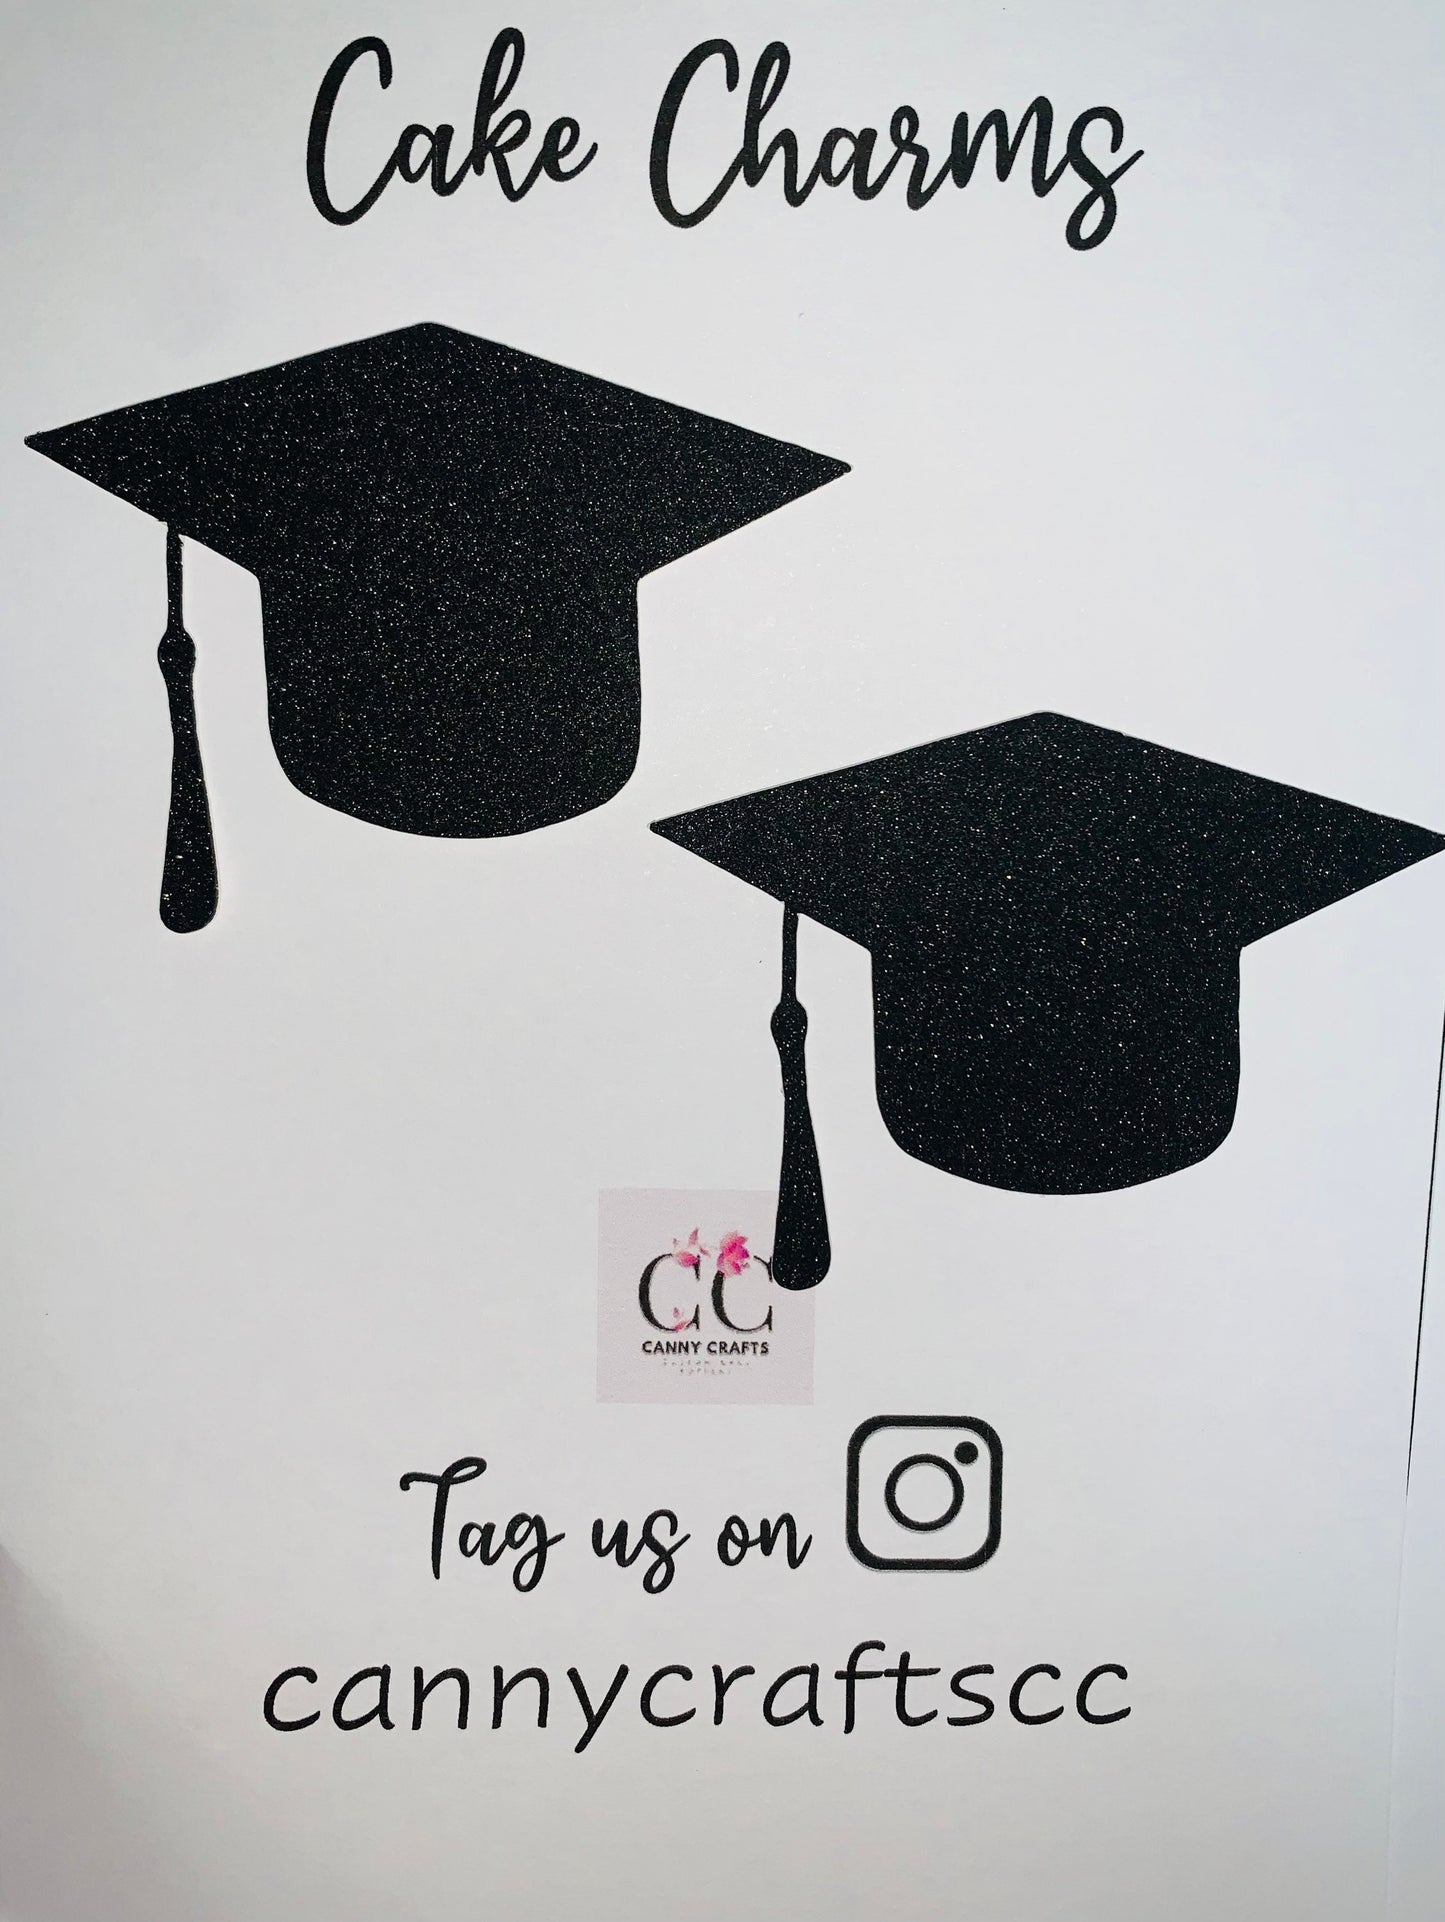 Graduation cupcake toppers